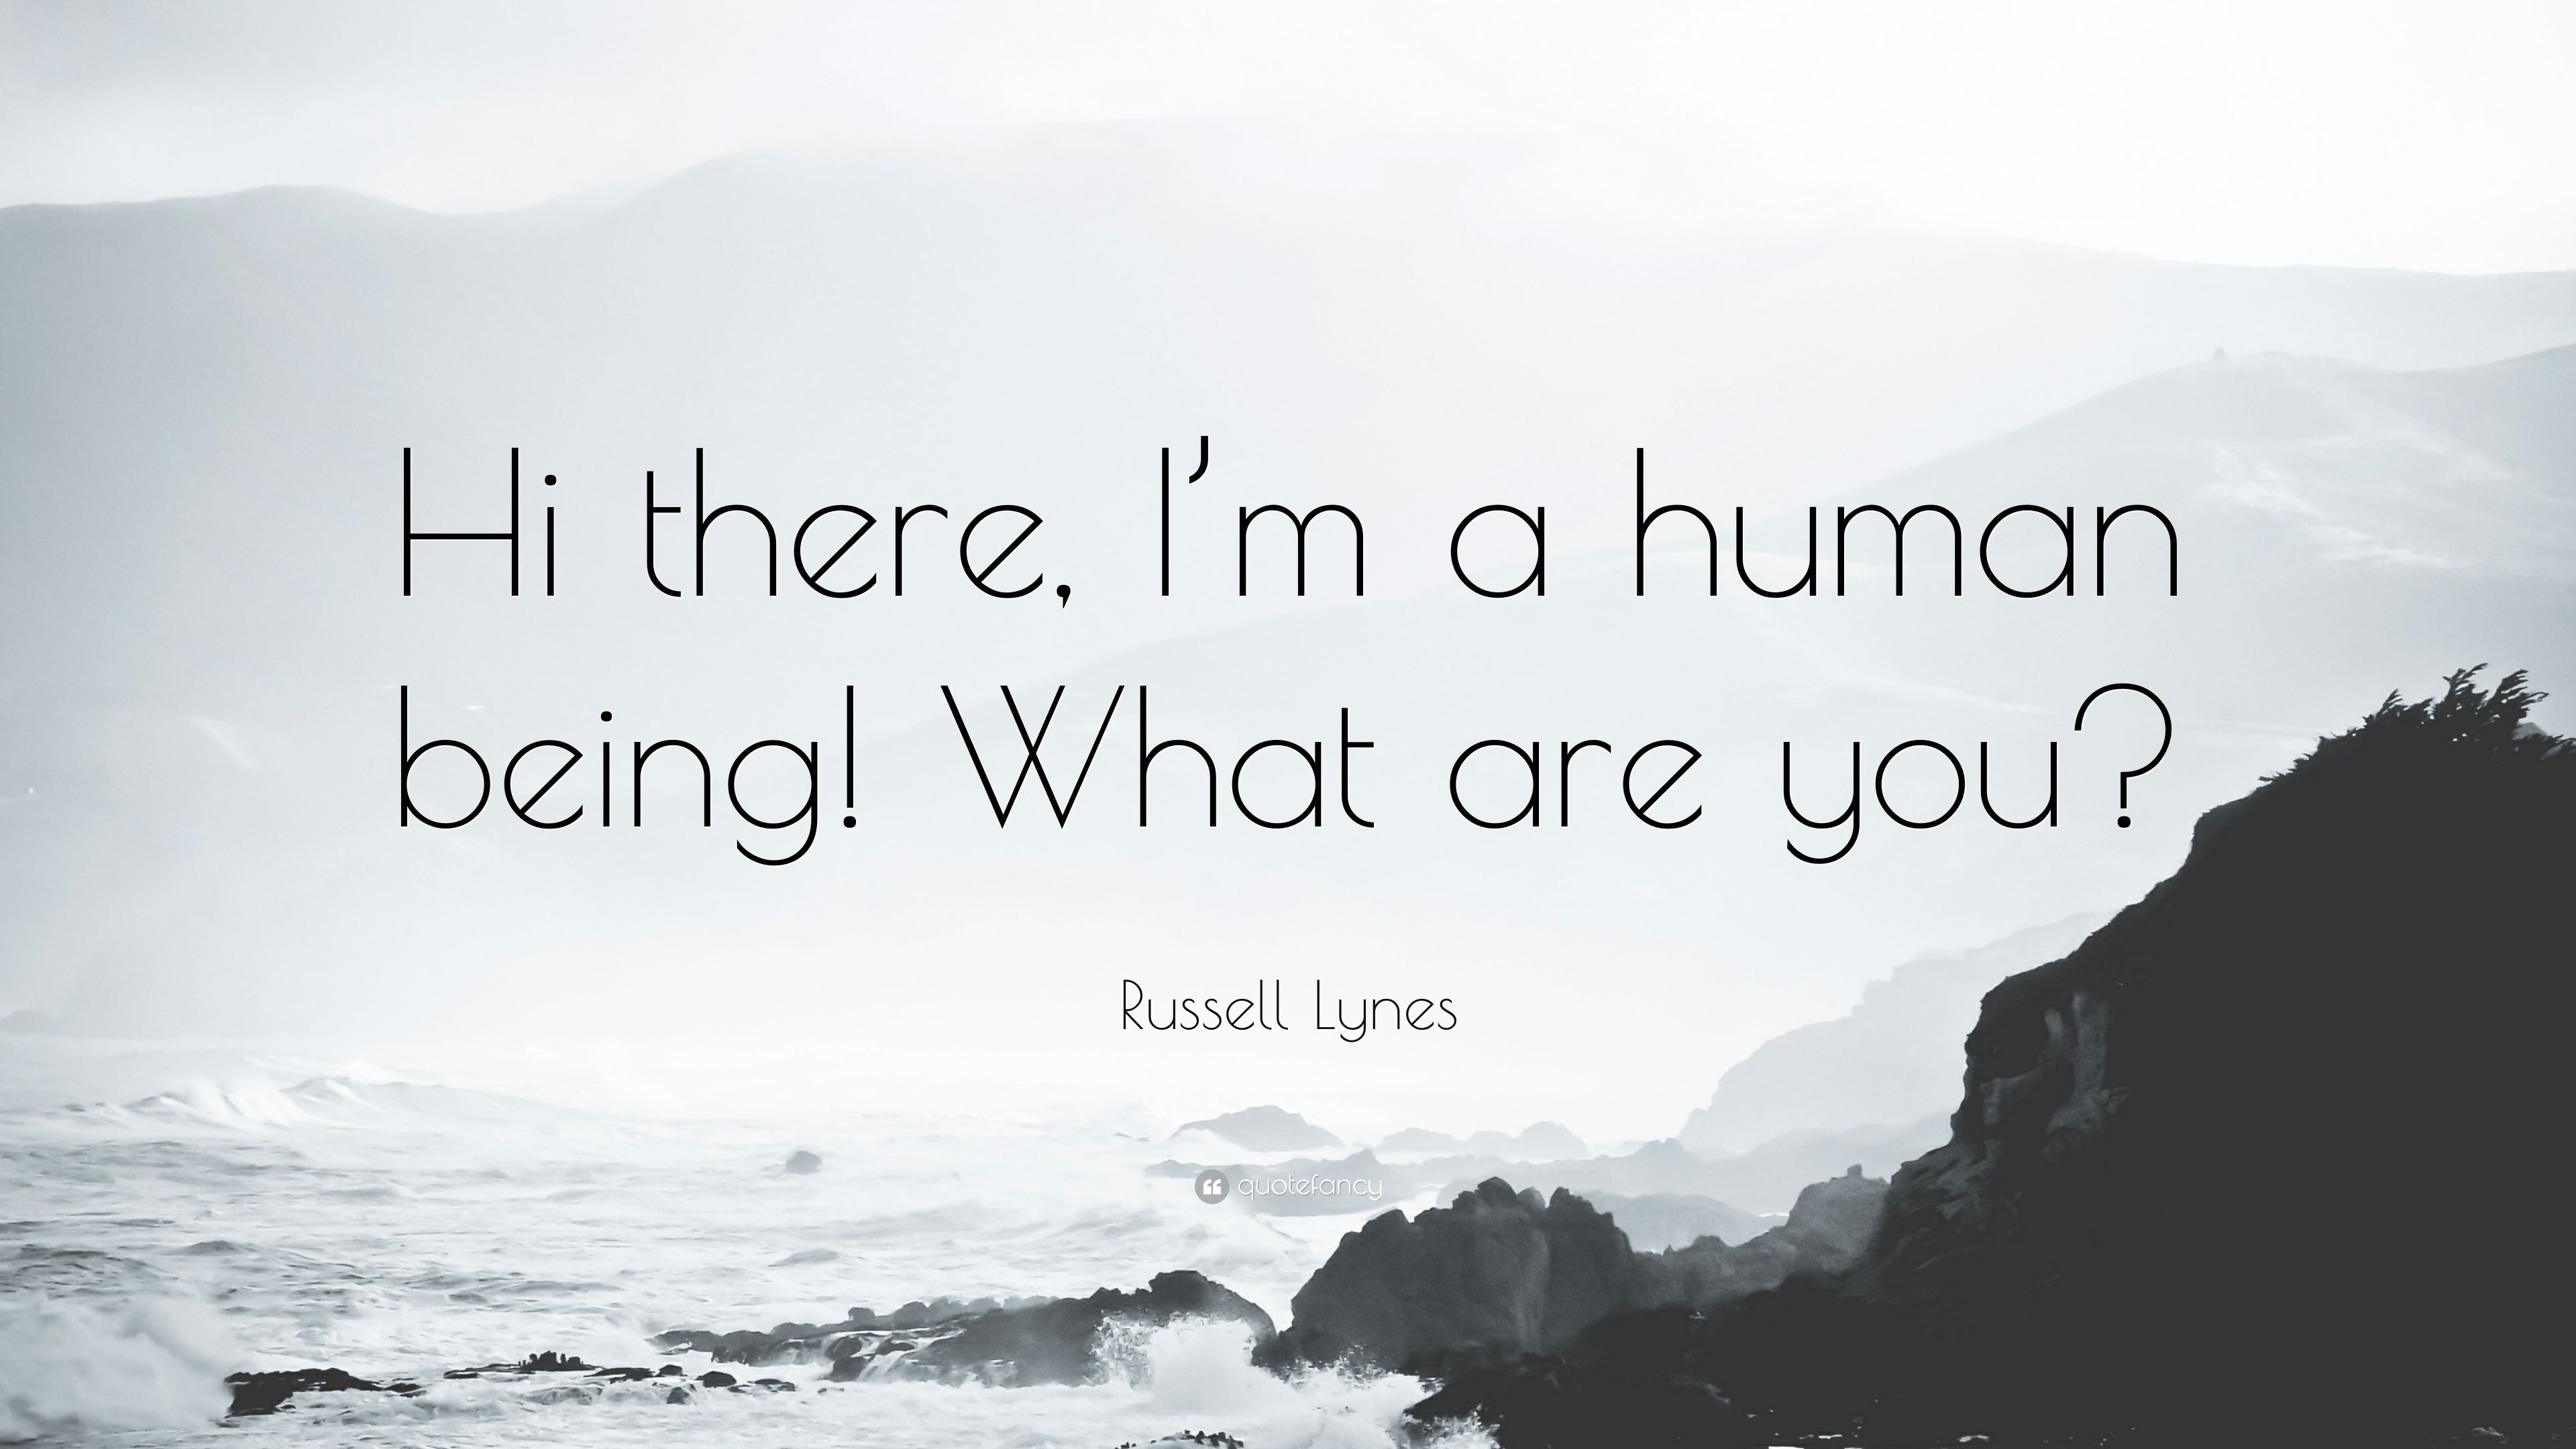 Russell Lynes Quote: “Hi there, I'm a human being! What are you?” (7 wallpaper)